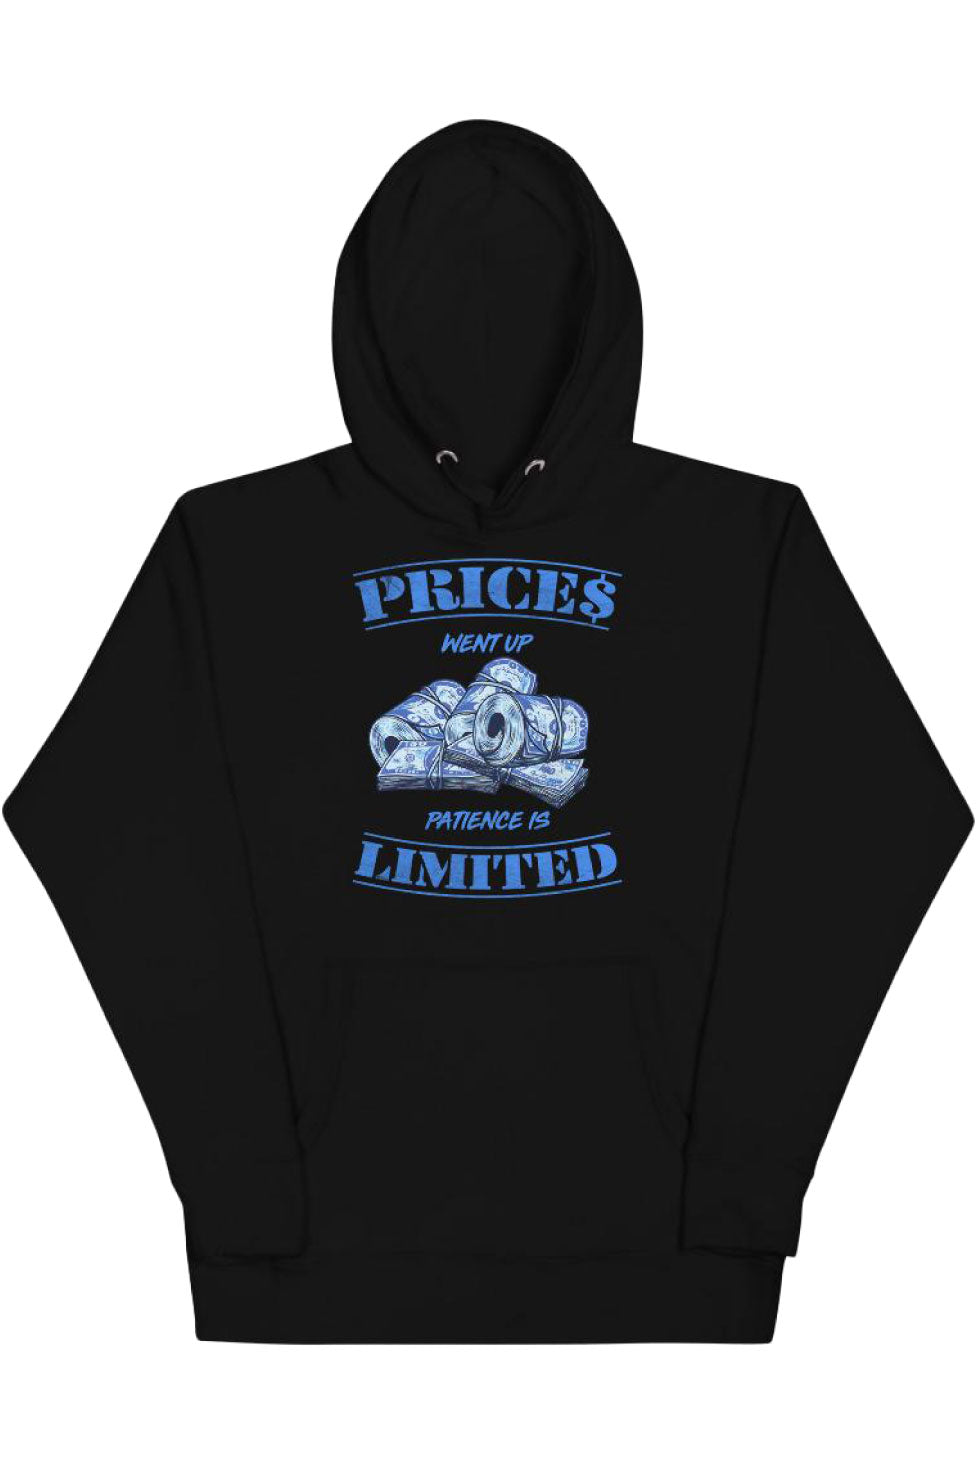 Women's Black Pullover Hoodie With Prices Went Up Patience Is Limited Text & Money Image Graphic